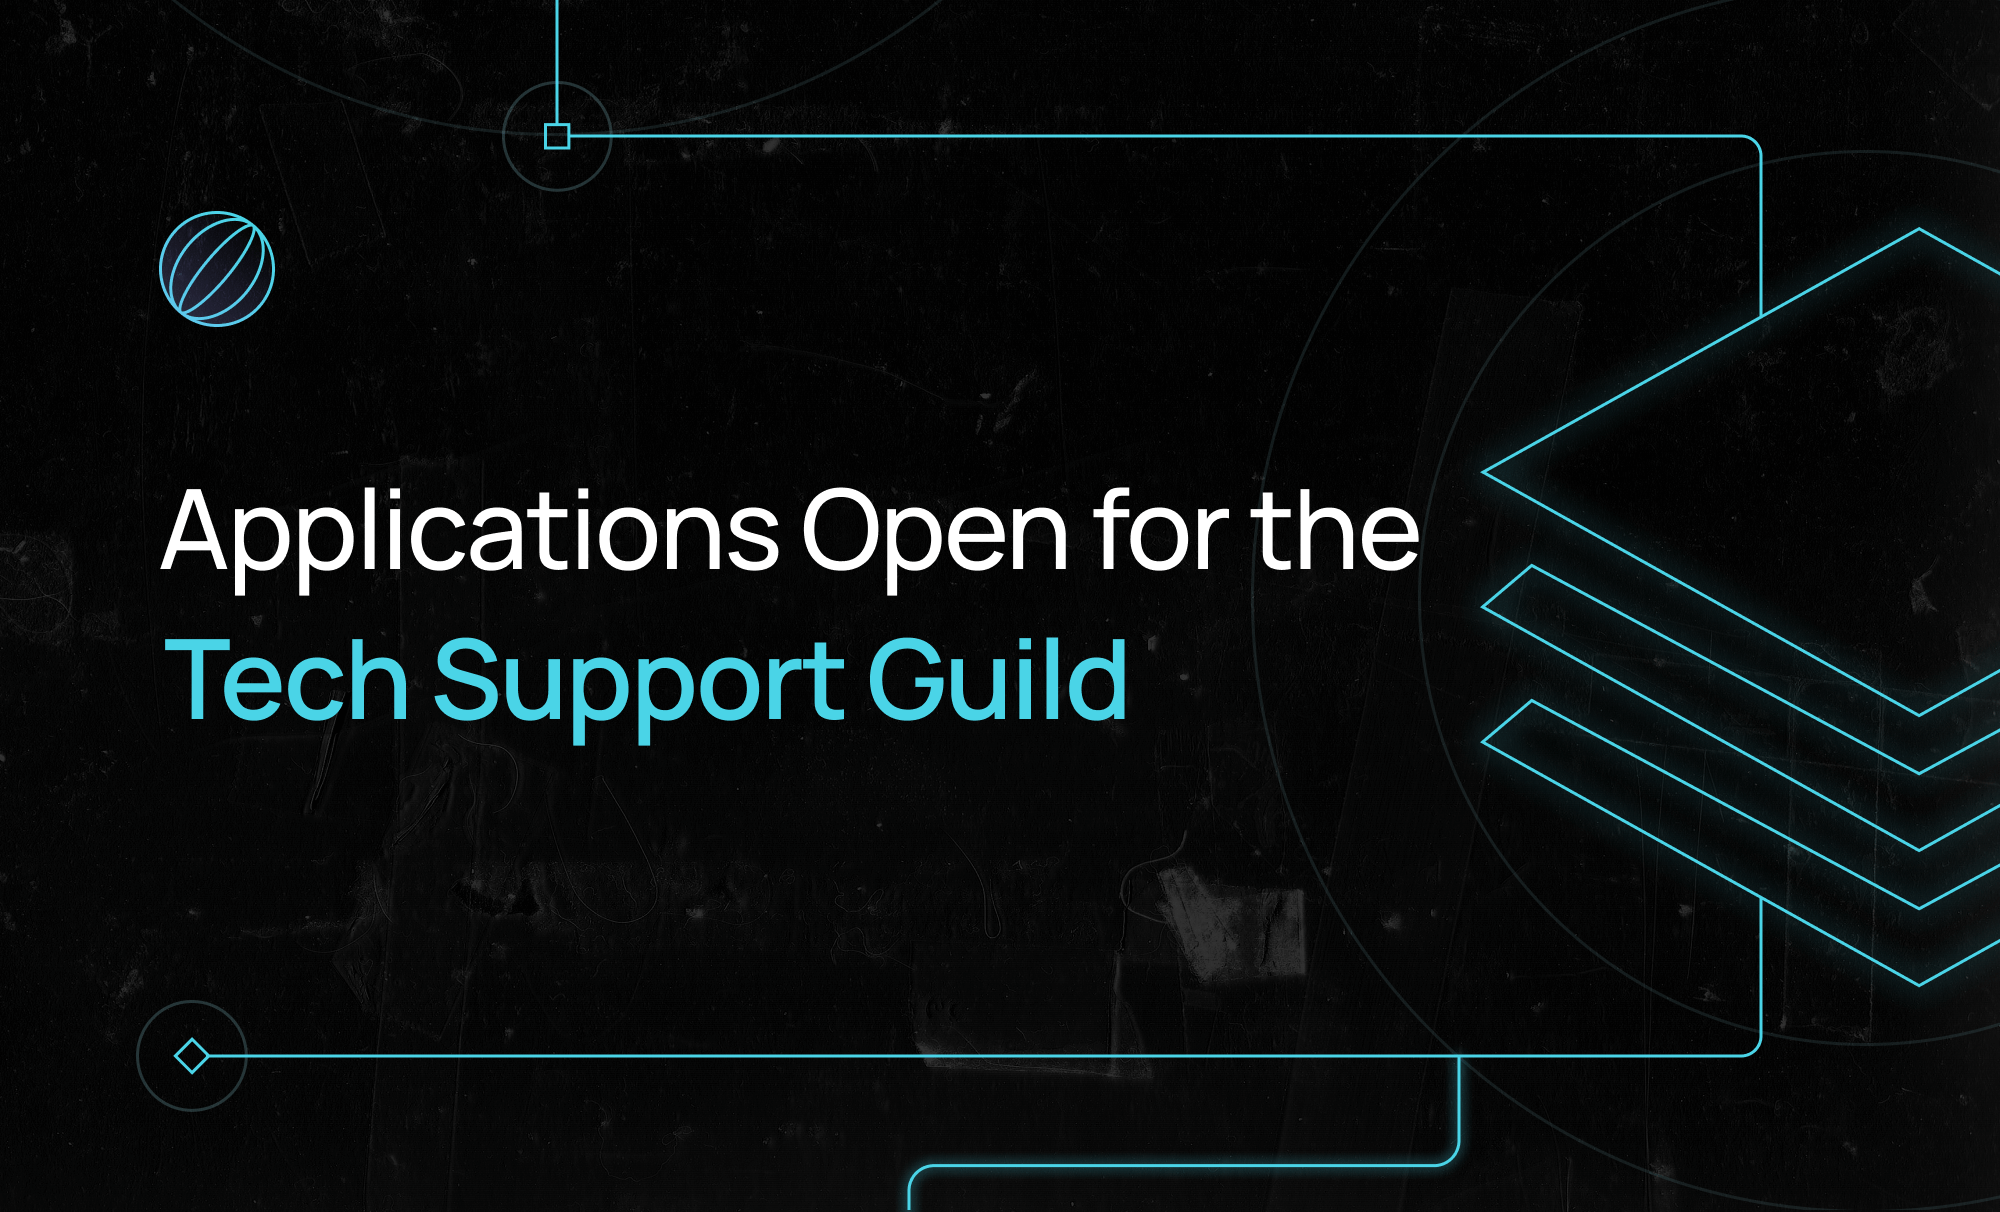 Applications Open for the Aragon Tech Support Guild